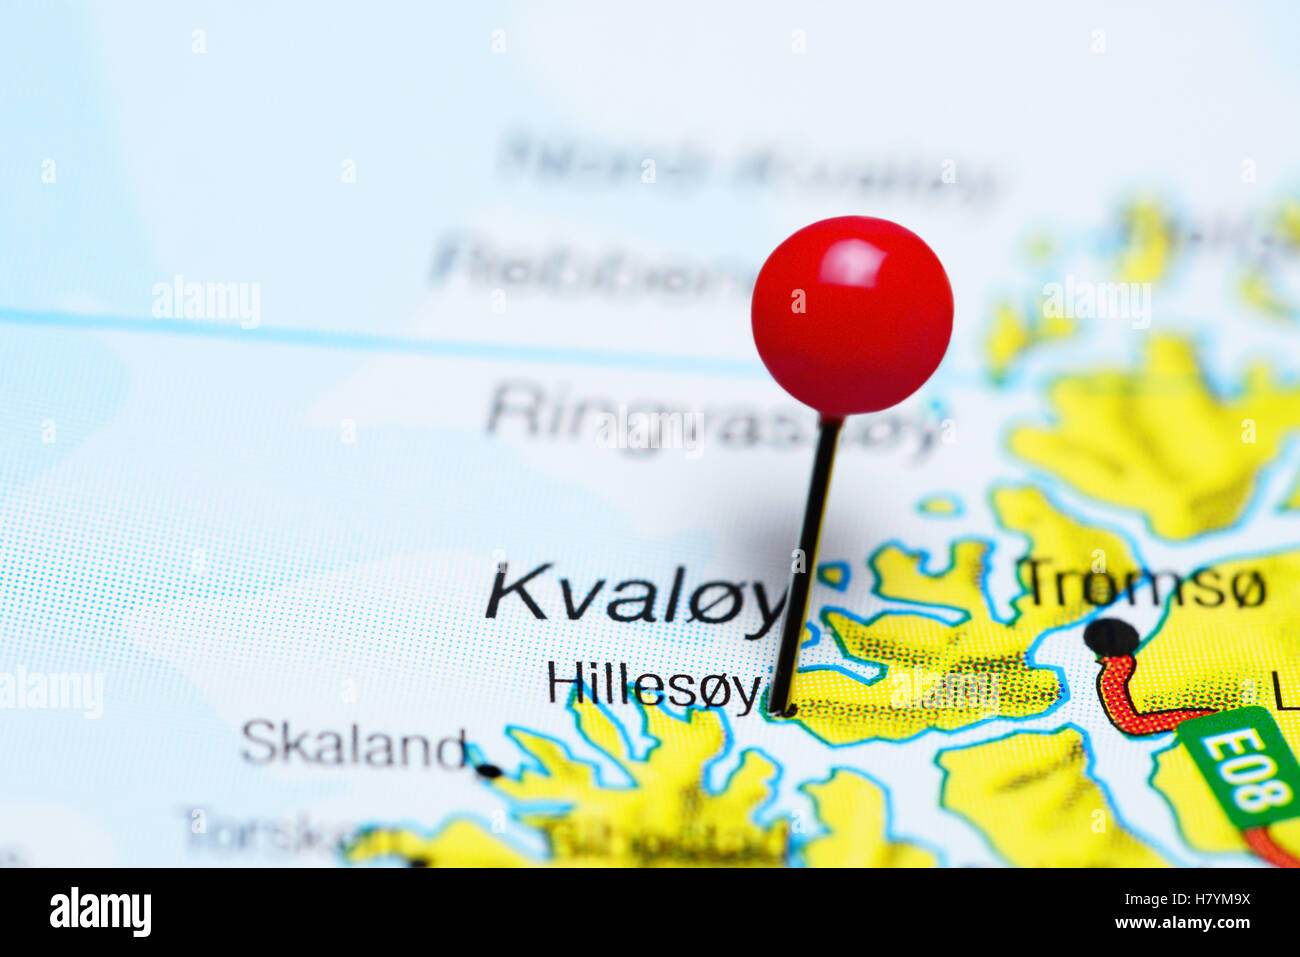 Hillesoy pinned on a map of Norway Stock Photo